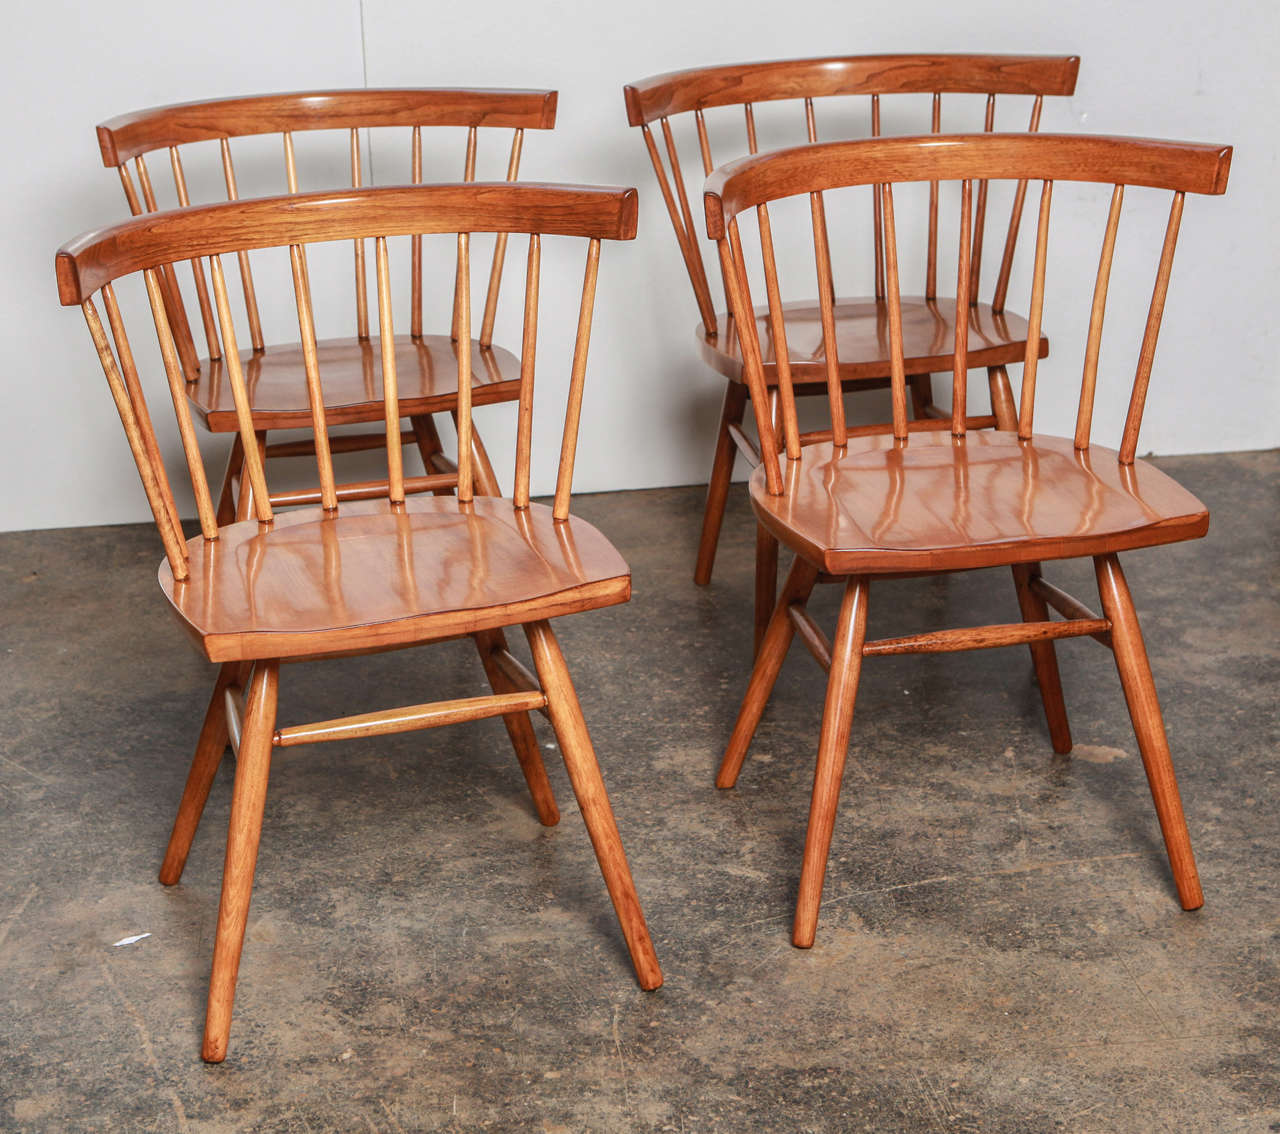 Classic vintage George Nakashima for Knoll Straight Chairs.